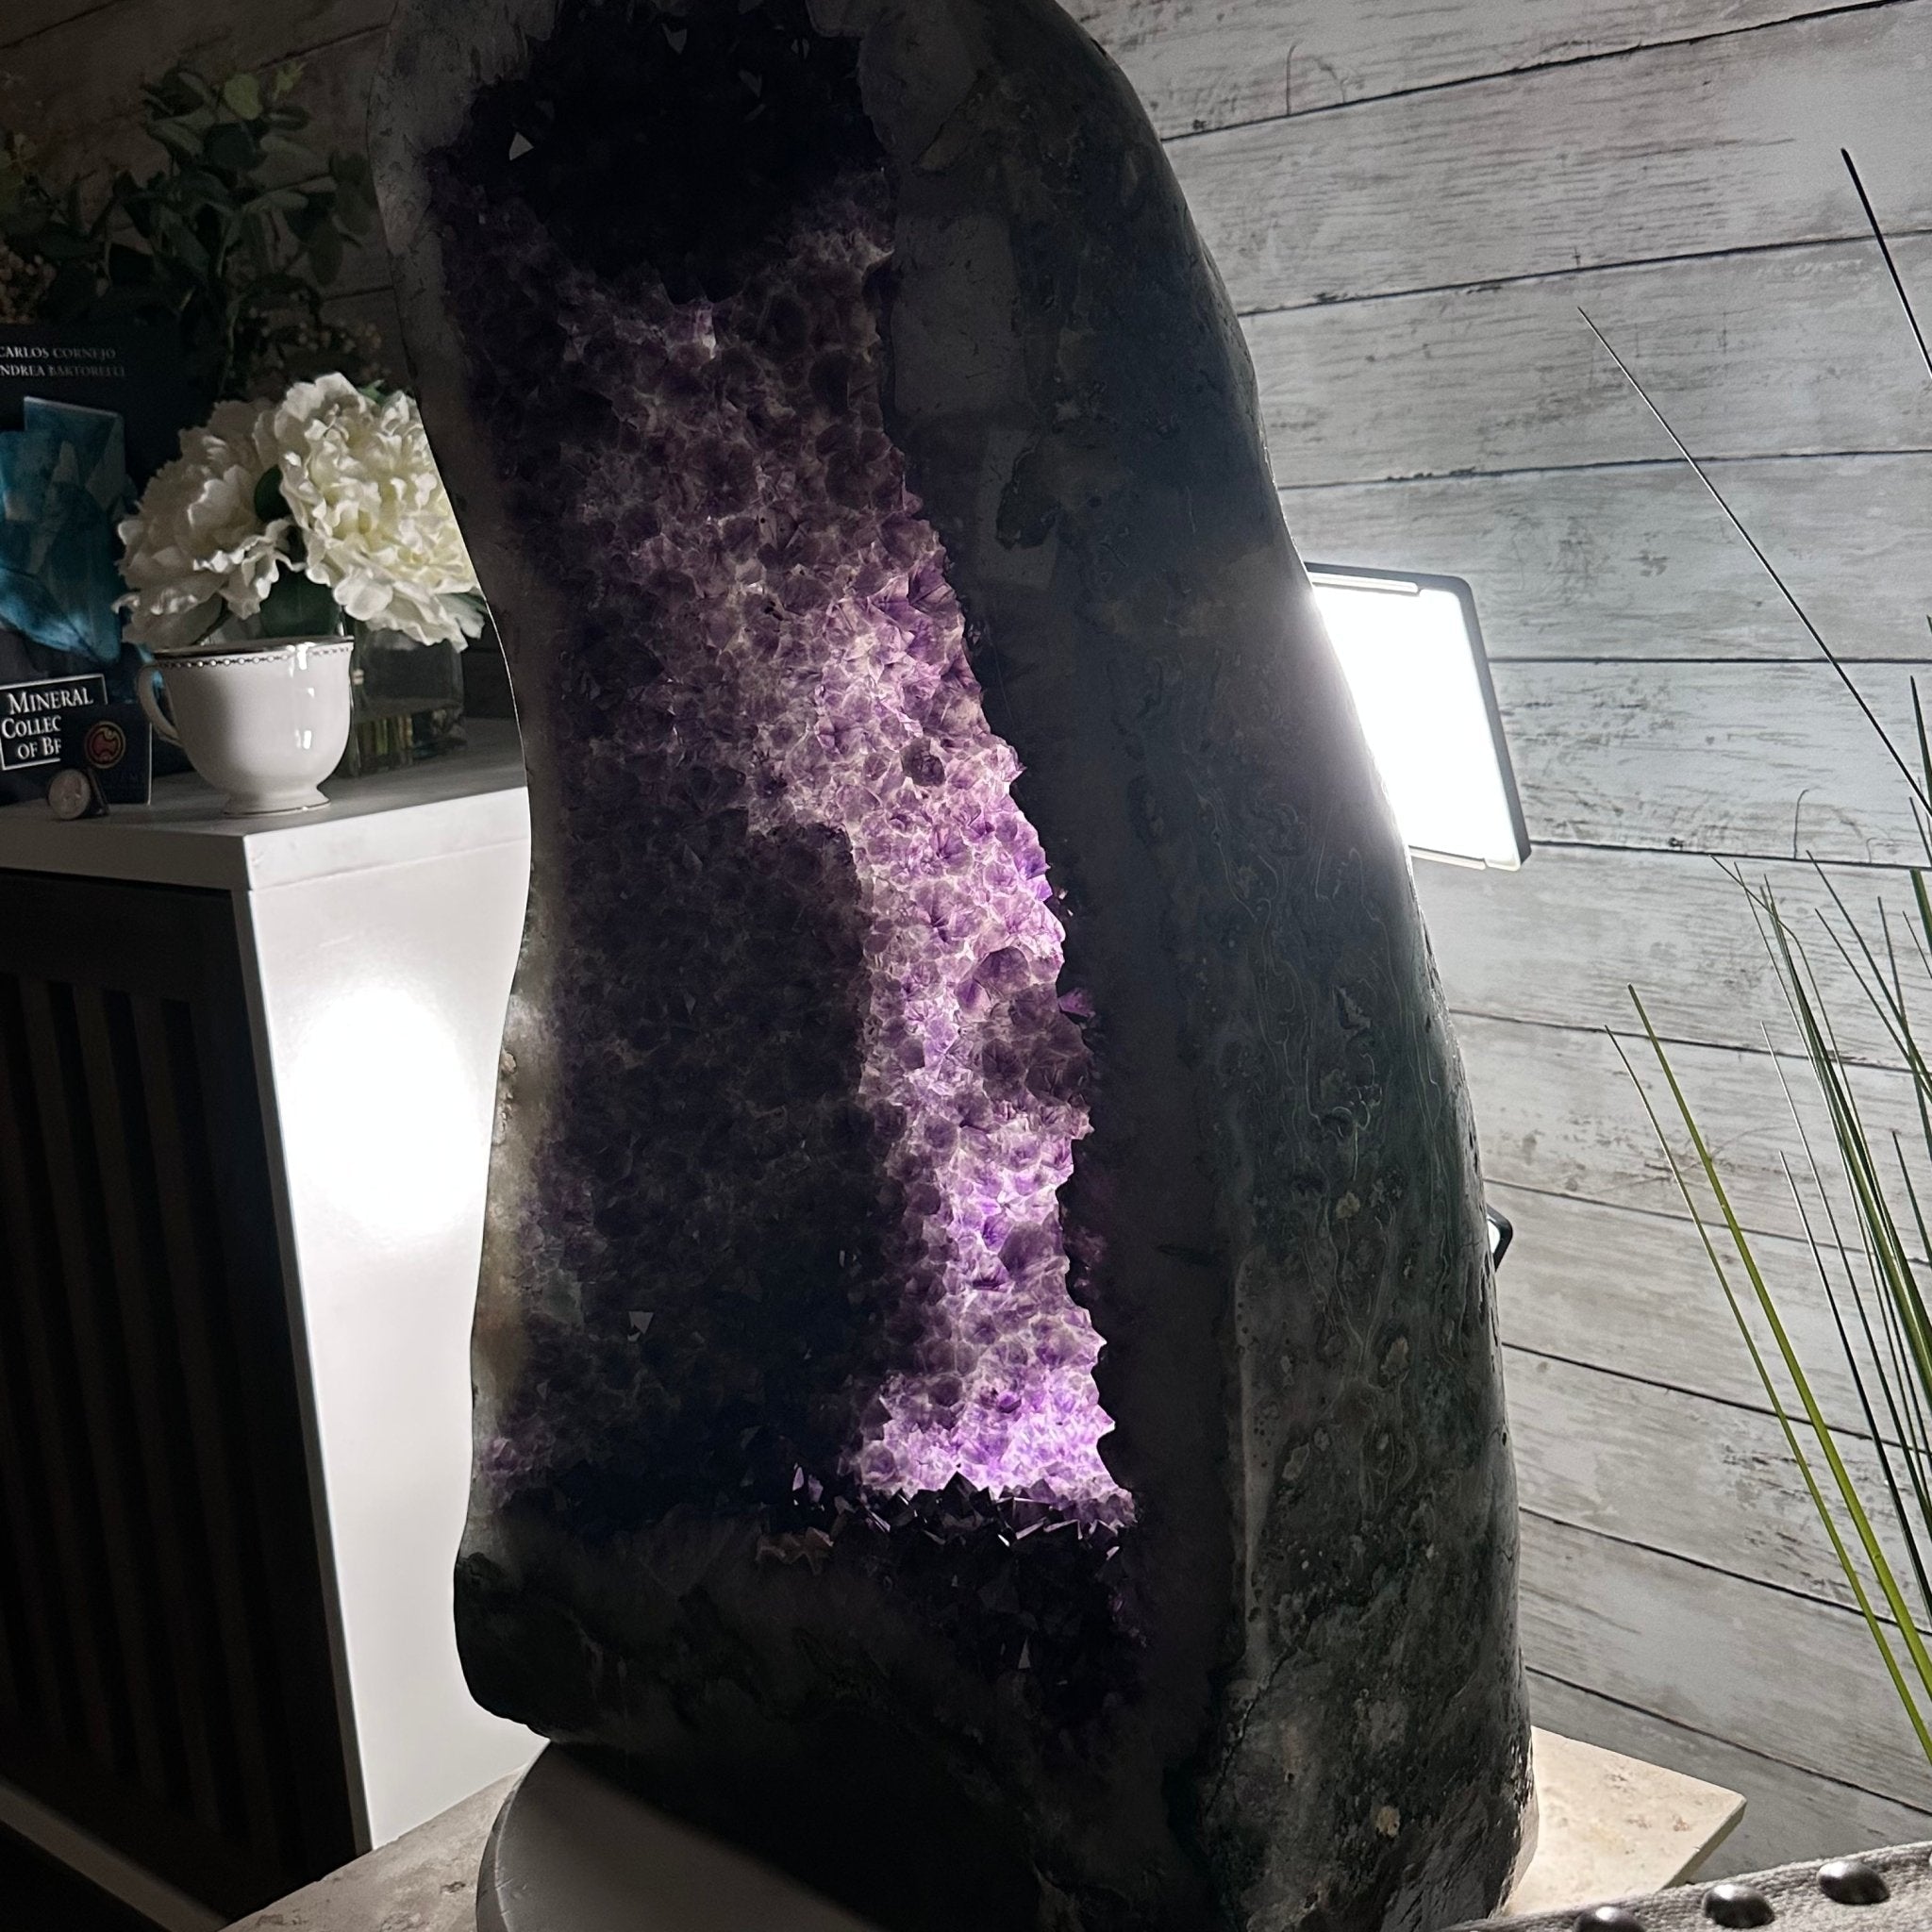 Extra Quality Polished Brazilian Amethyst Cathedral, 110.5 lbs & 26.5" tall Model #5602-0063 by Brazil Gems - Brazil GemsBrazil GemsExtra Quality Polished Brazilian Amethyst Cathedral, 110.5 lbs & 26.5" tall Model #5602-0063 by Brazil GemsPolished Cathedrals5602-0063